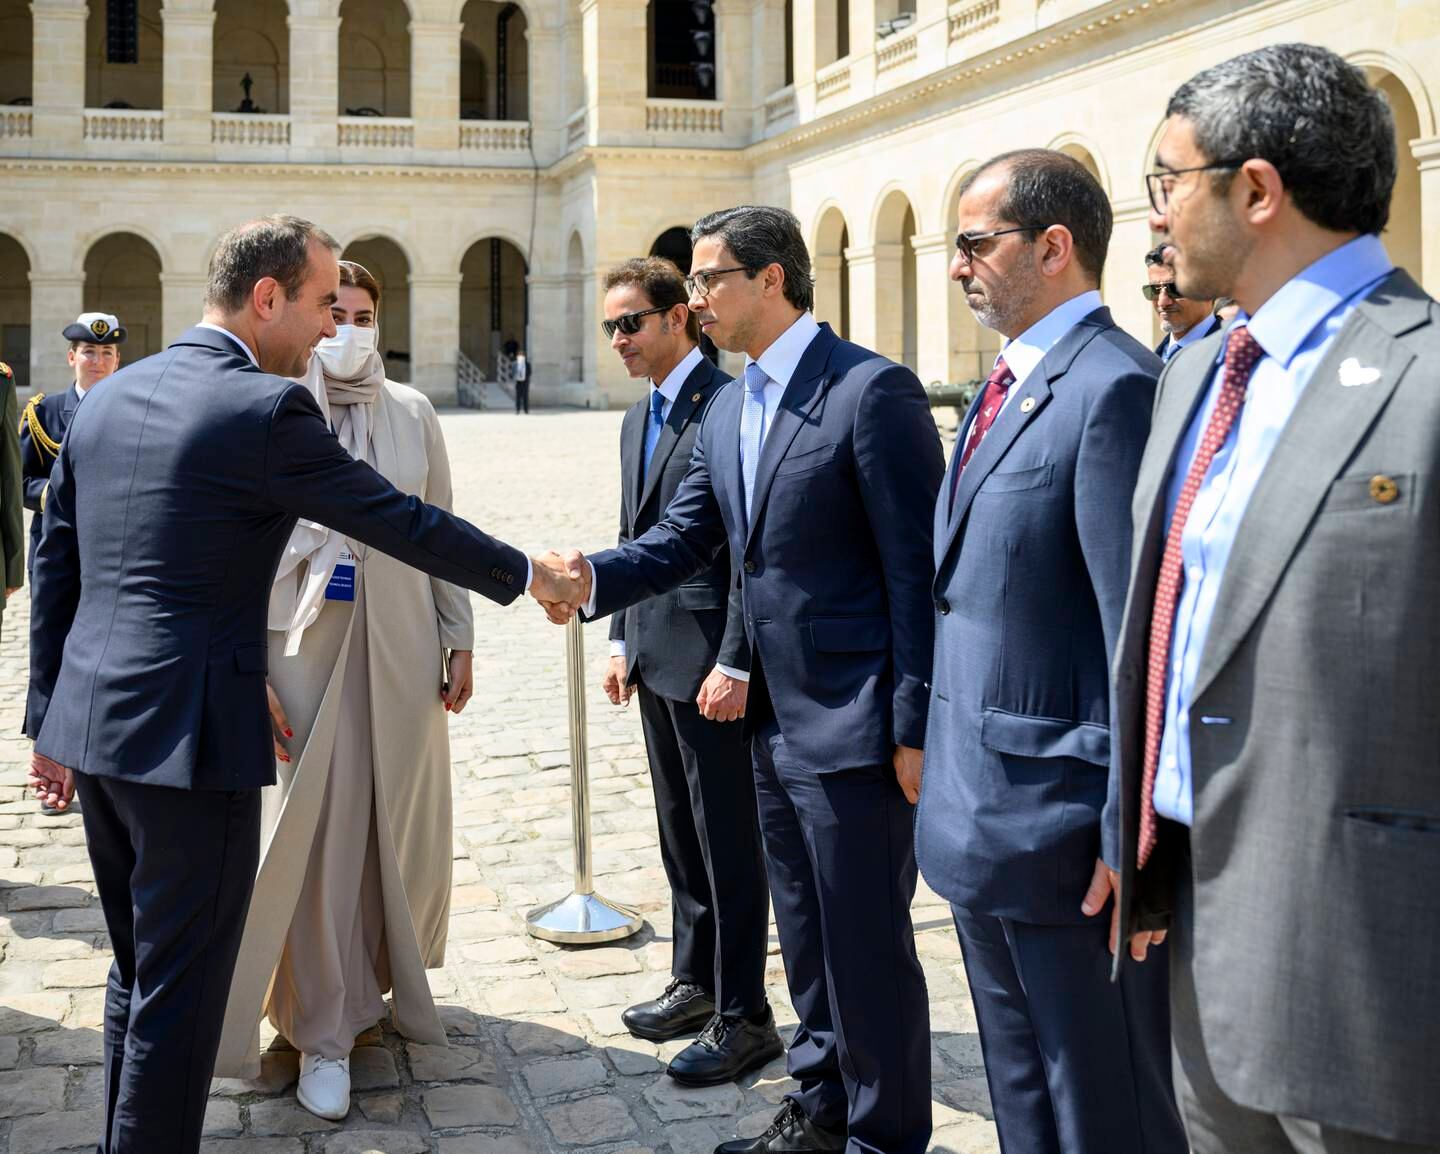 Sheikh Mansour bin Zayed greets Sebastien Lecornu, France's Minister of Armed Forces at the Military Museum, seen here with Sheikh Hazza bin Zayed, Sheikh Hamed bin Zayed and Sheikh Abdullah bin Zayed. Photo: Hamad Al Kaabi / Presidential Court